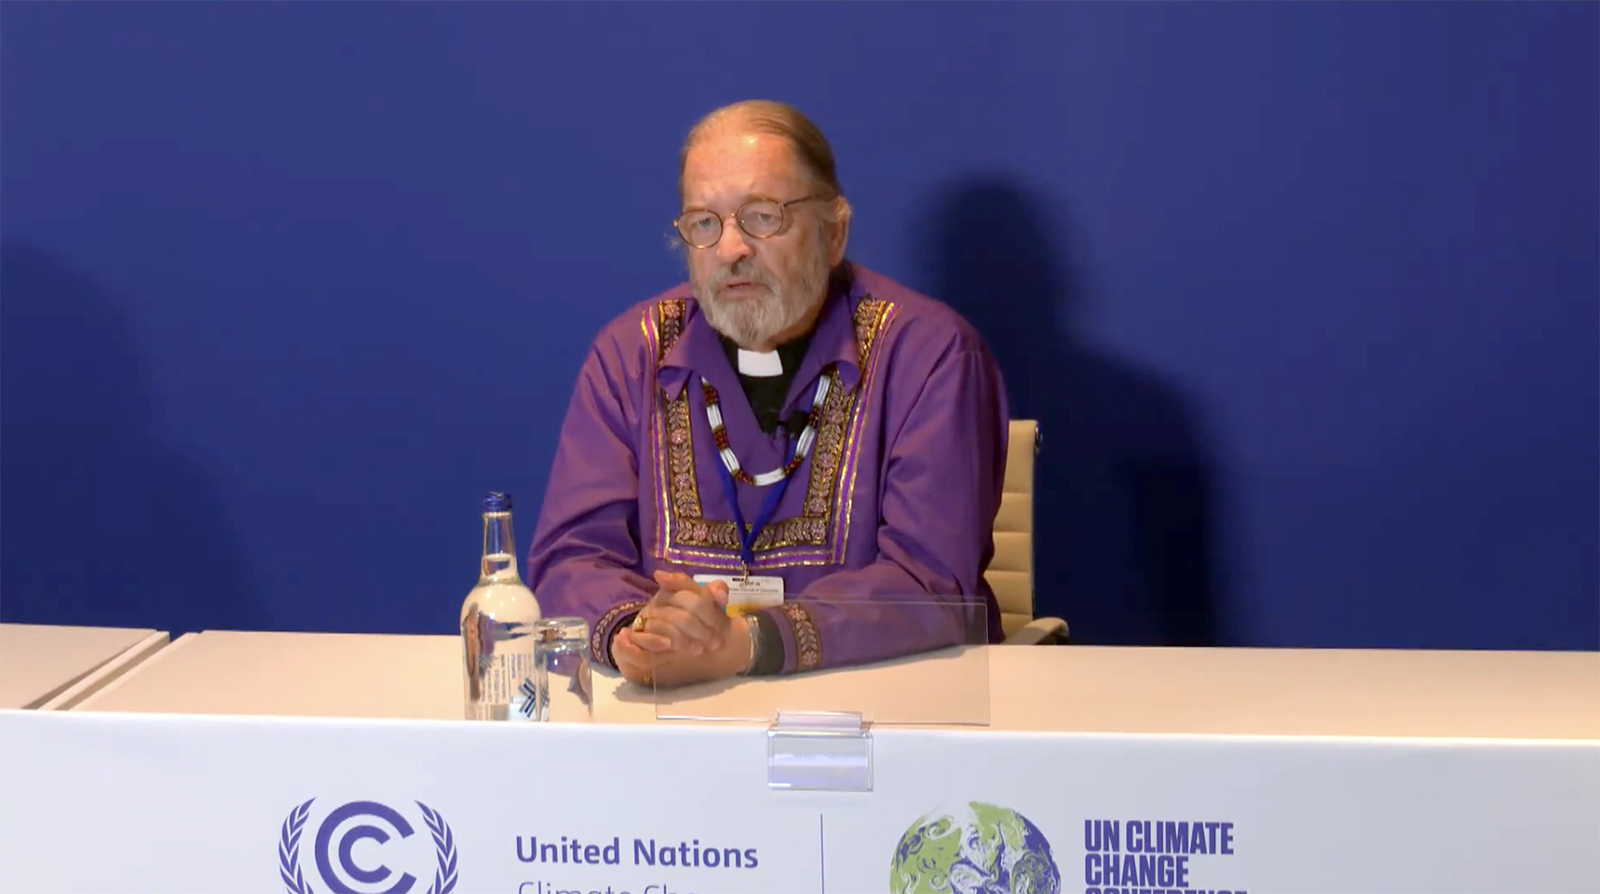 The Most Rev. Mark MacDonald, president of the World Council of Churches for North America and National Indigenous Archbishop of the Anglican Church of Canada. Video screengrab